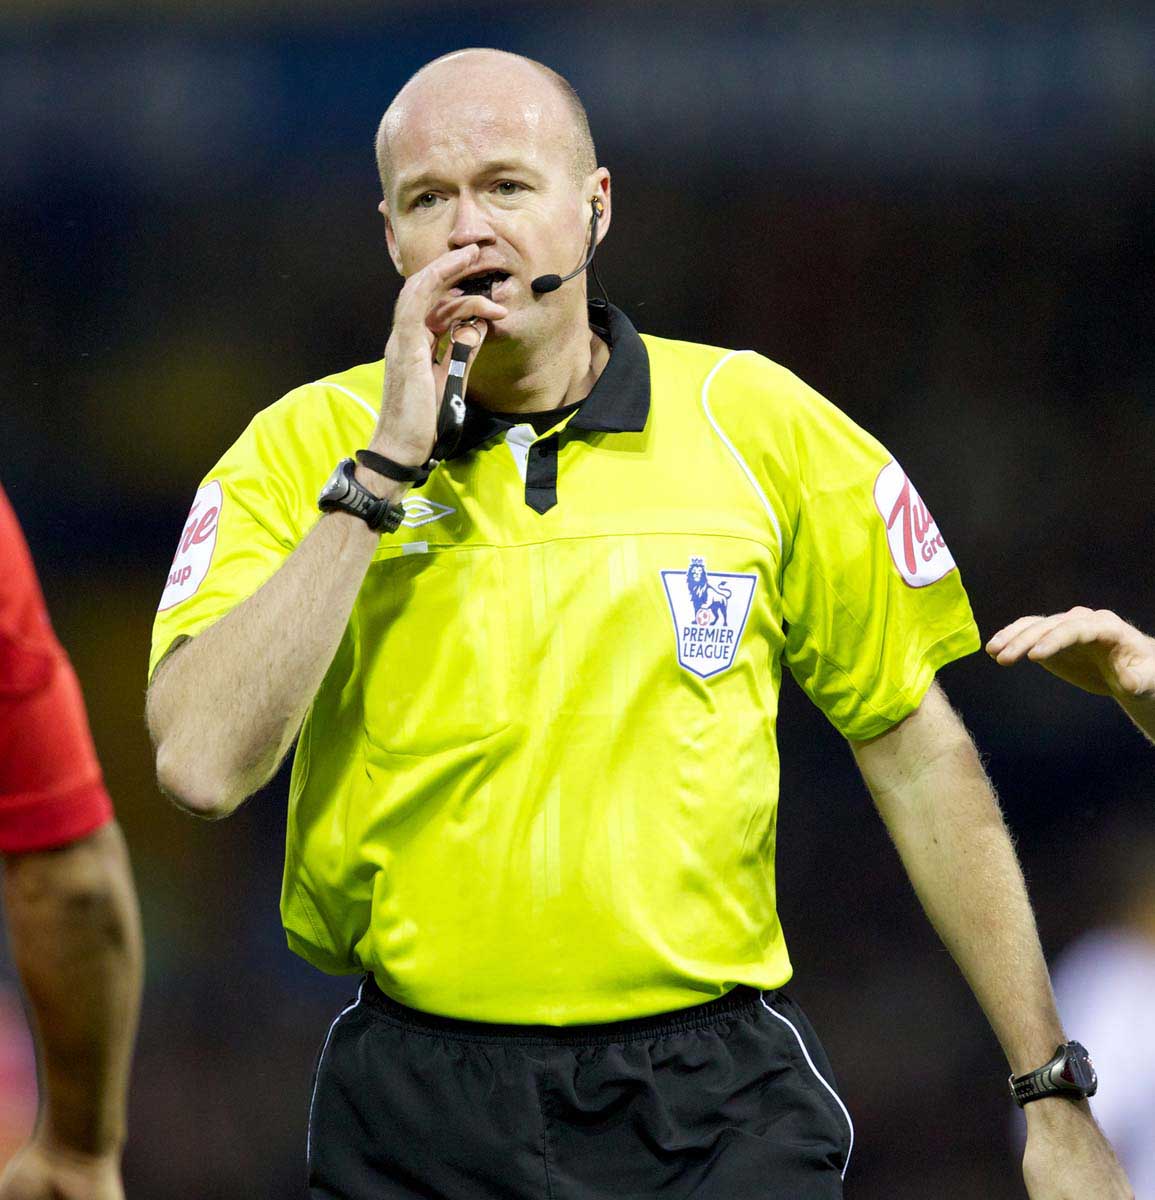 REFEREES: WHY DOES THE GAME DO SWEET FA ABOUT FAILING OFFICIALS?